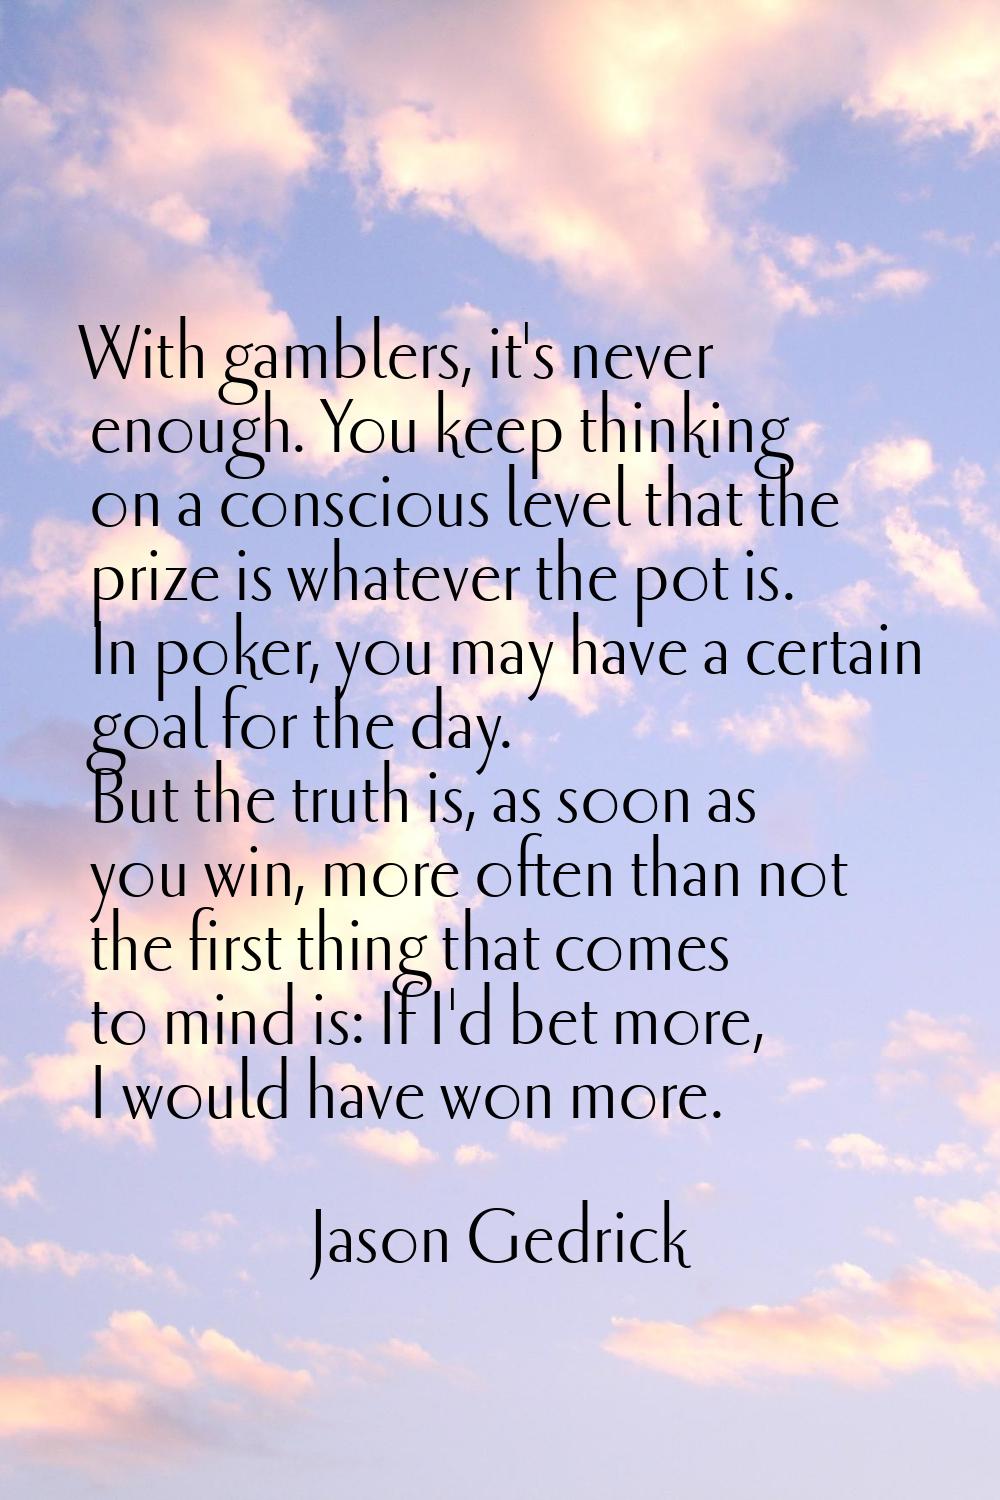 With gamblers, it's never enough. You keep thinking on a conscious level that the prize is whatever